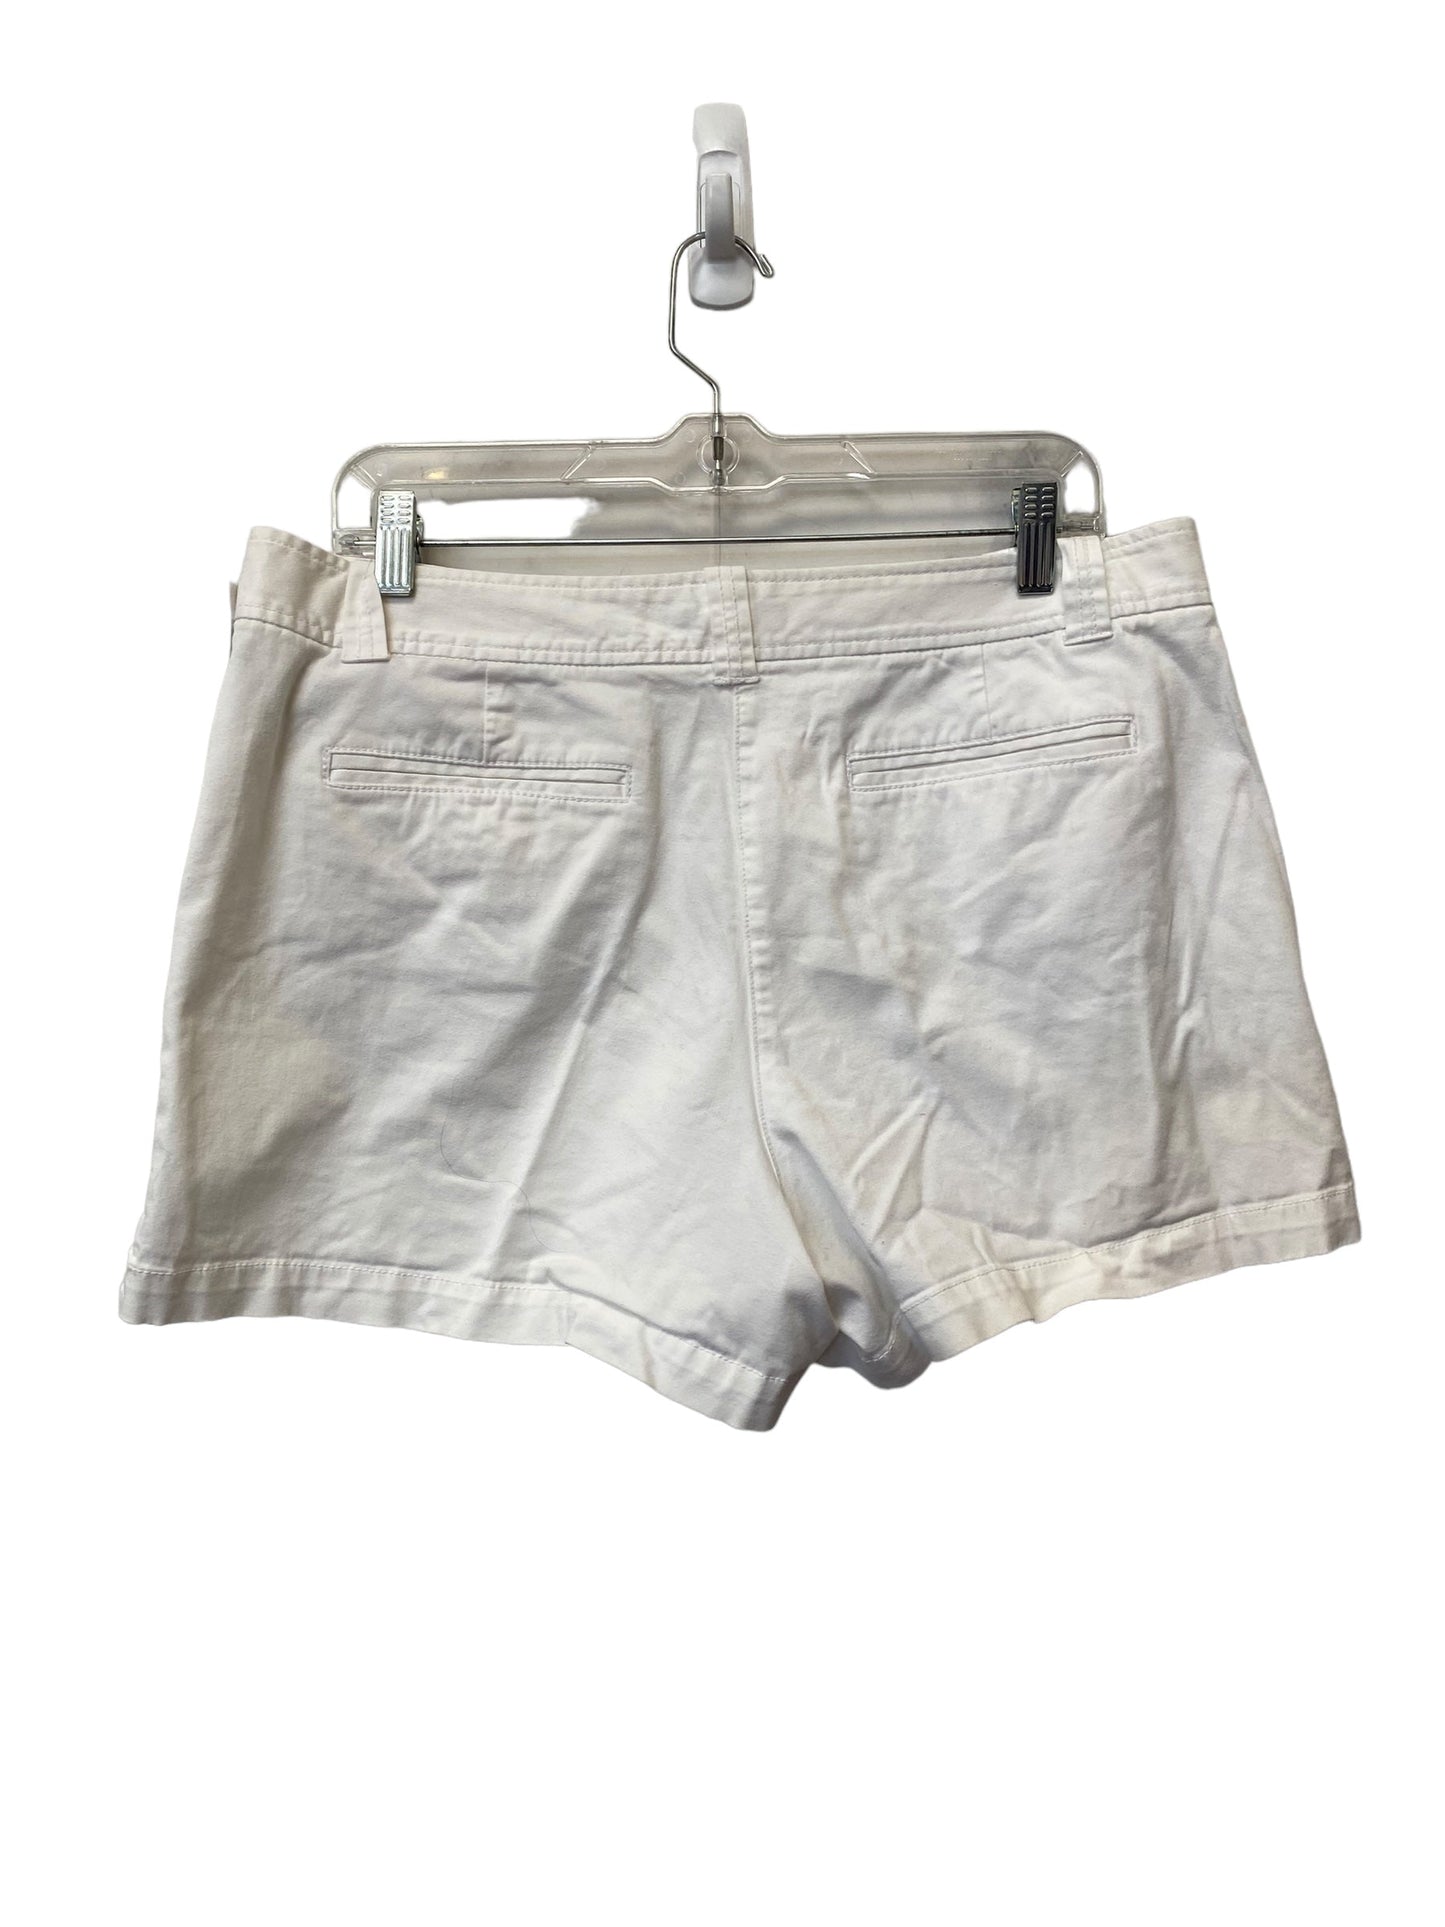 White Shorts New York And Co, Size 12